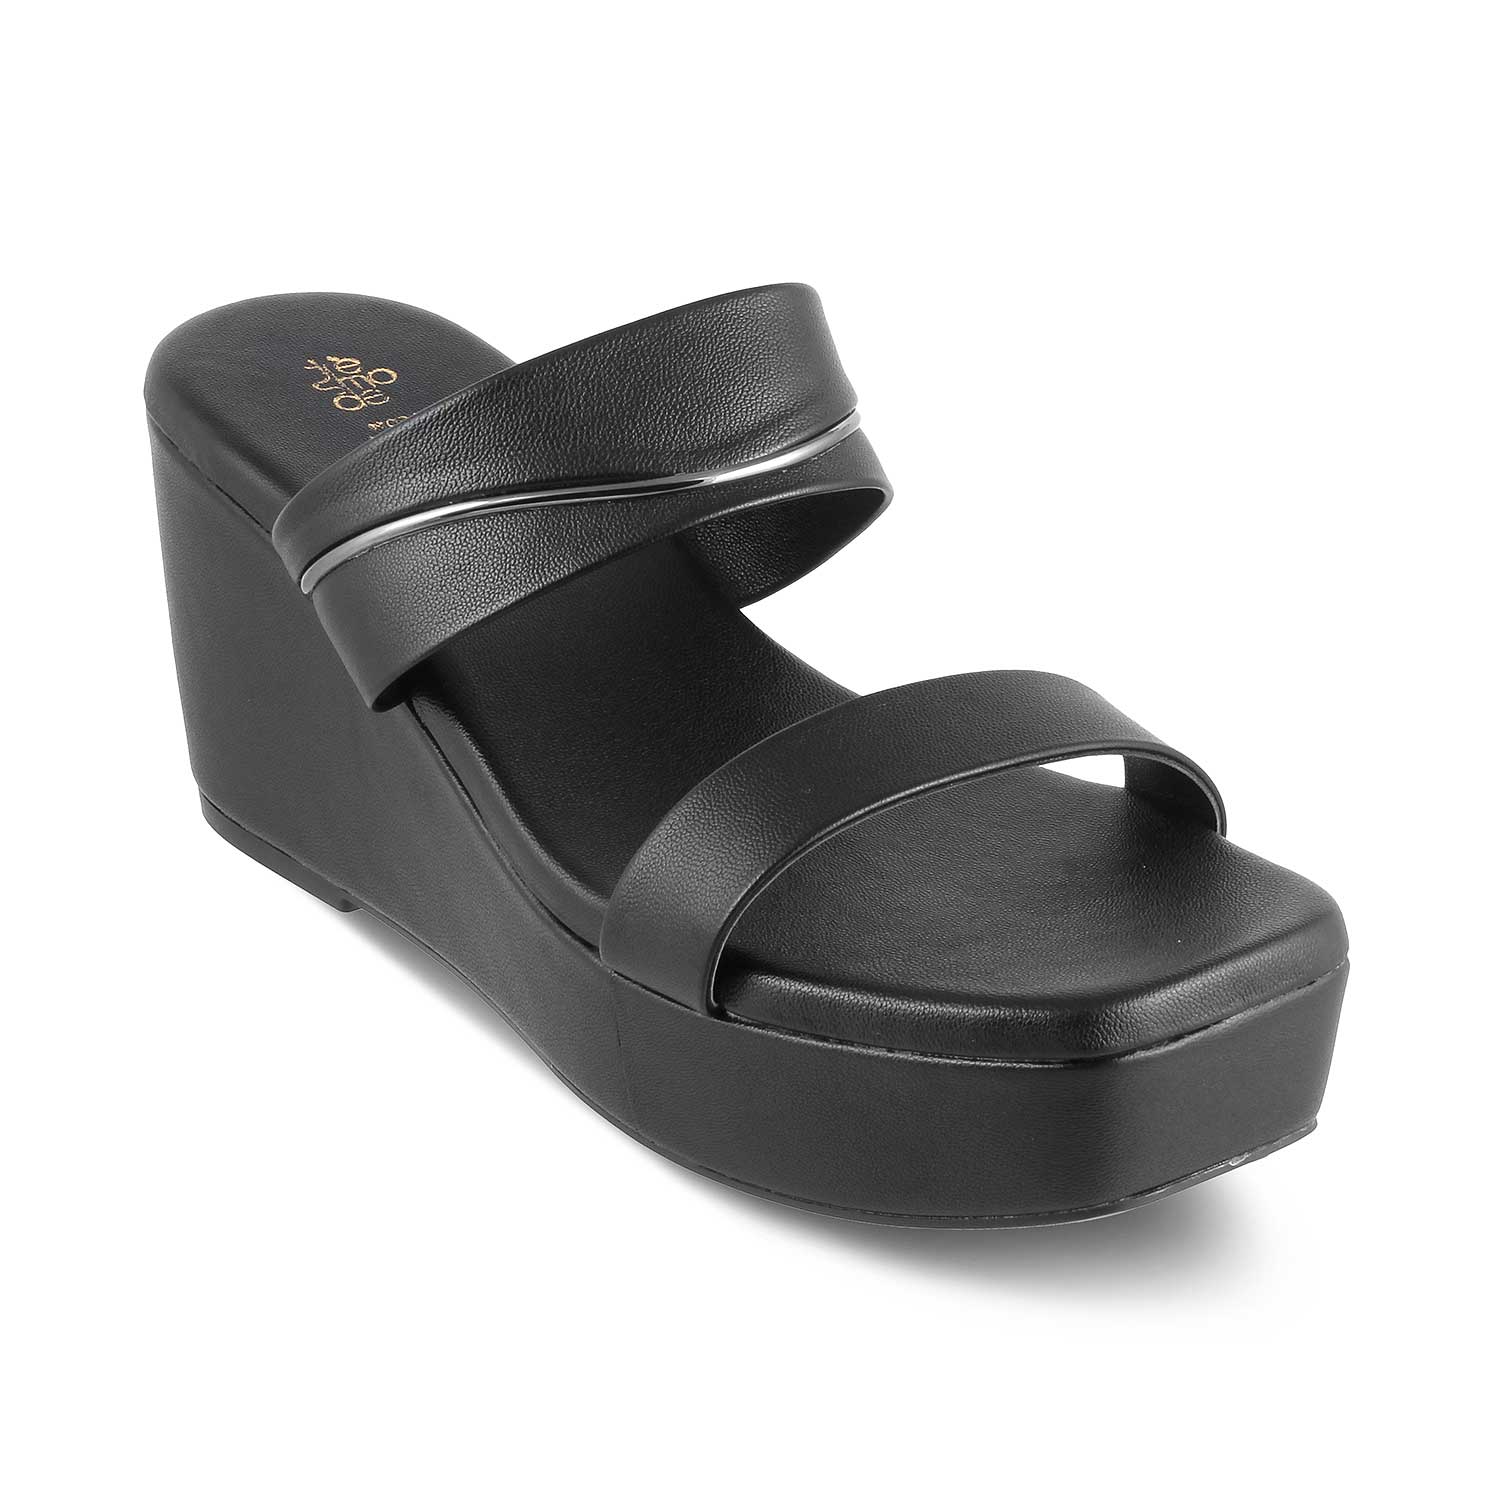 The Tofame Black Women's Dress Wedge Sandals Tresmode